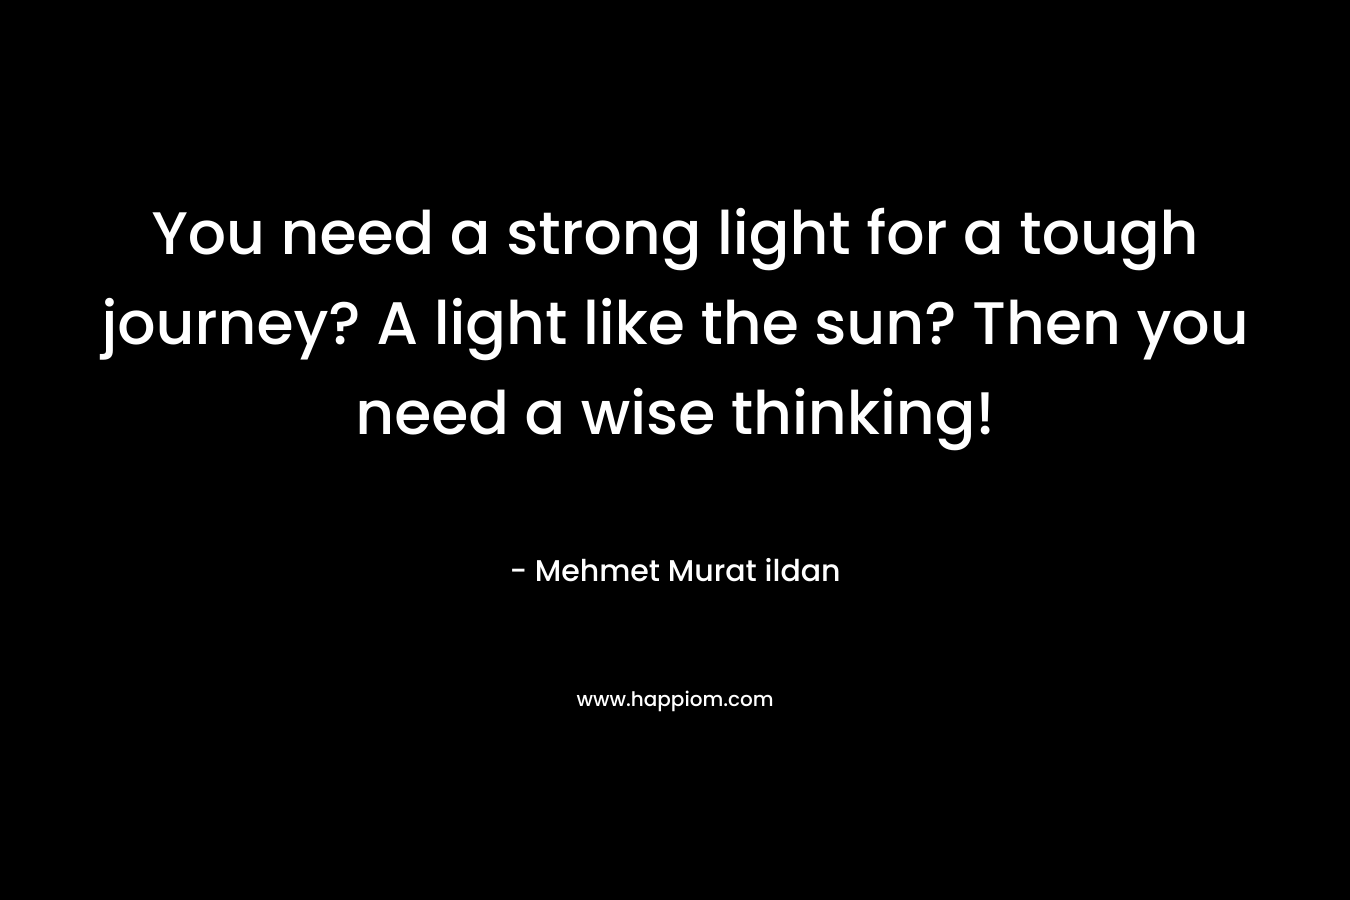 You need a strong light for a tough journey? A light like the sun? Then you need a wise thinking!